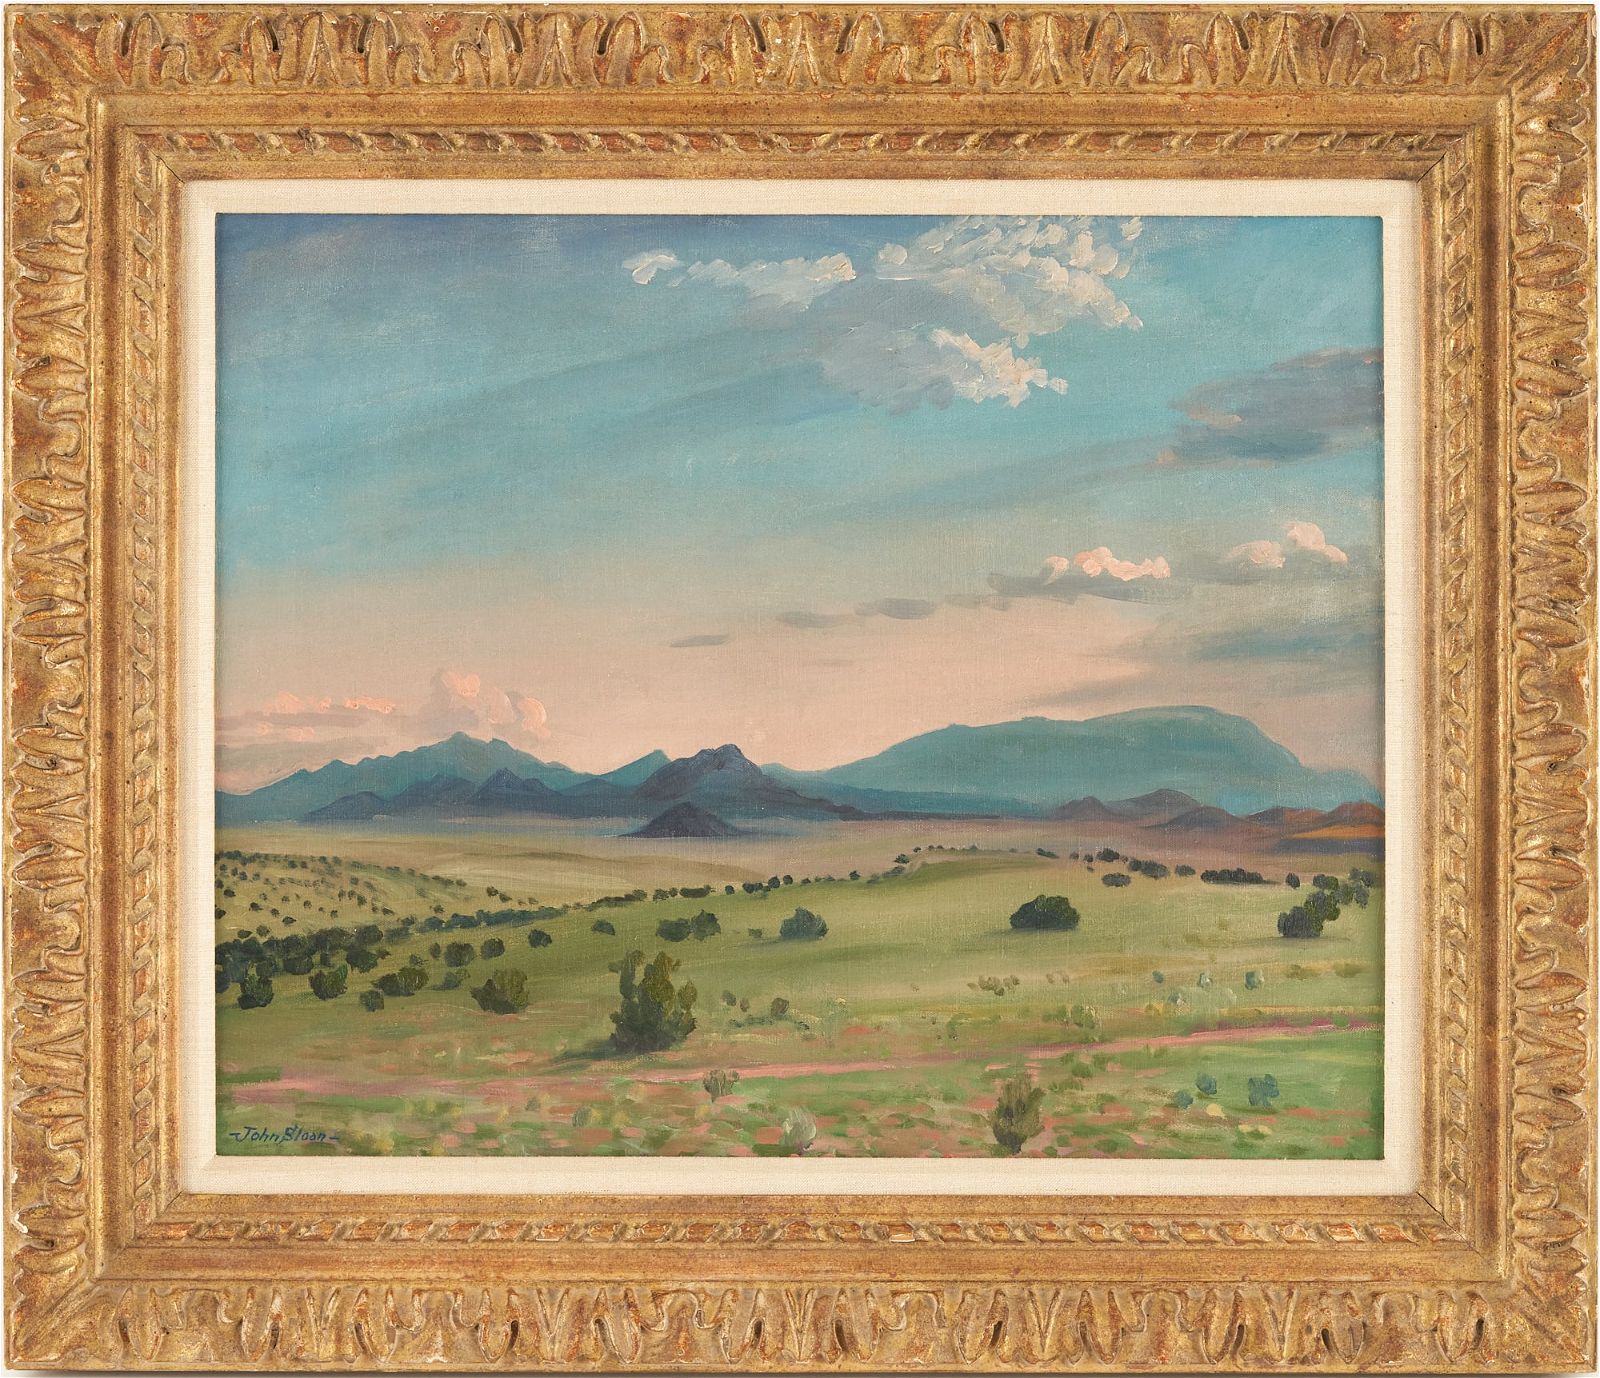 John Sloan, ‘Land of Turquoise’, which sold for $36,400 with buyer’s premium at Case.
